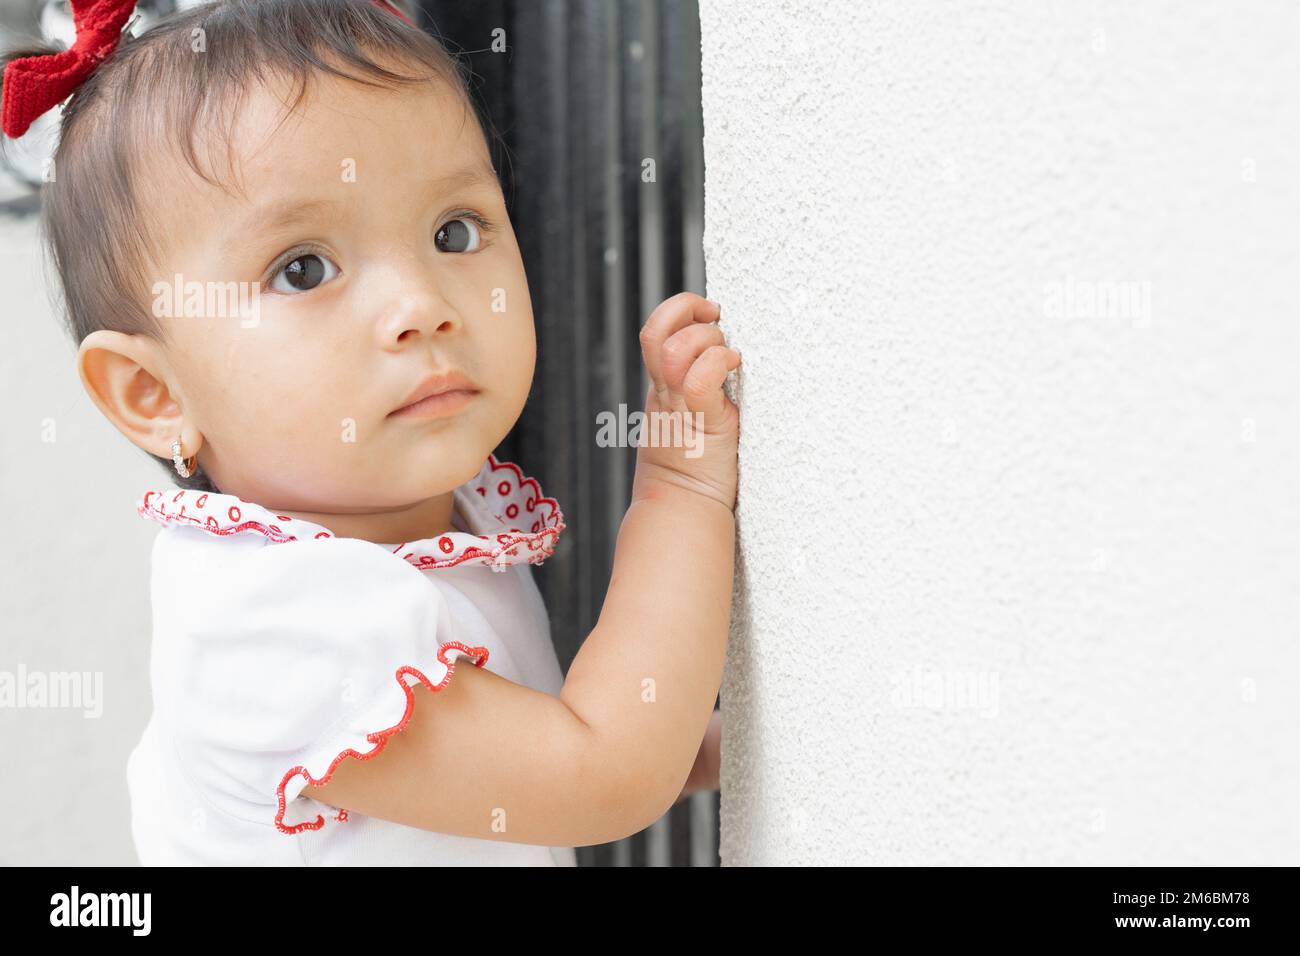 beautiful baby brunette latina, with her hand placed on the wall to hold herself up and not fall, while looking serious and curiously Stock Photo